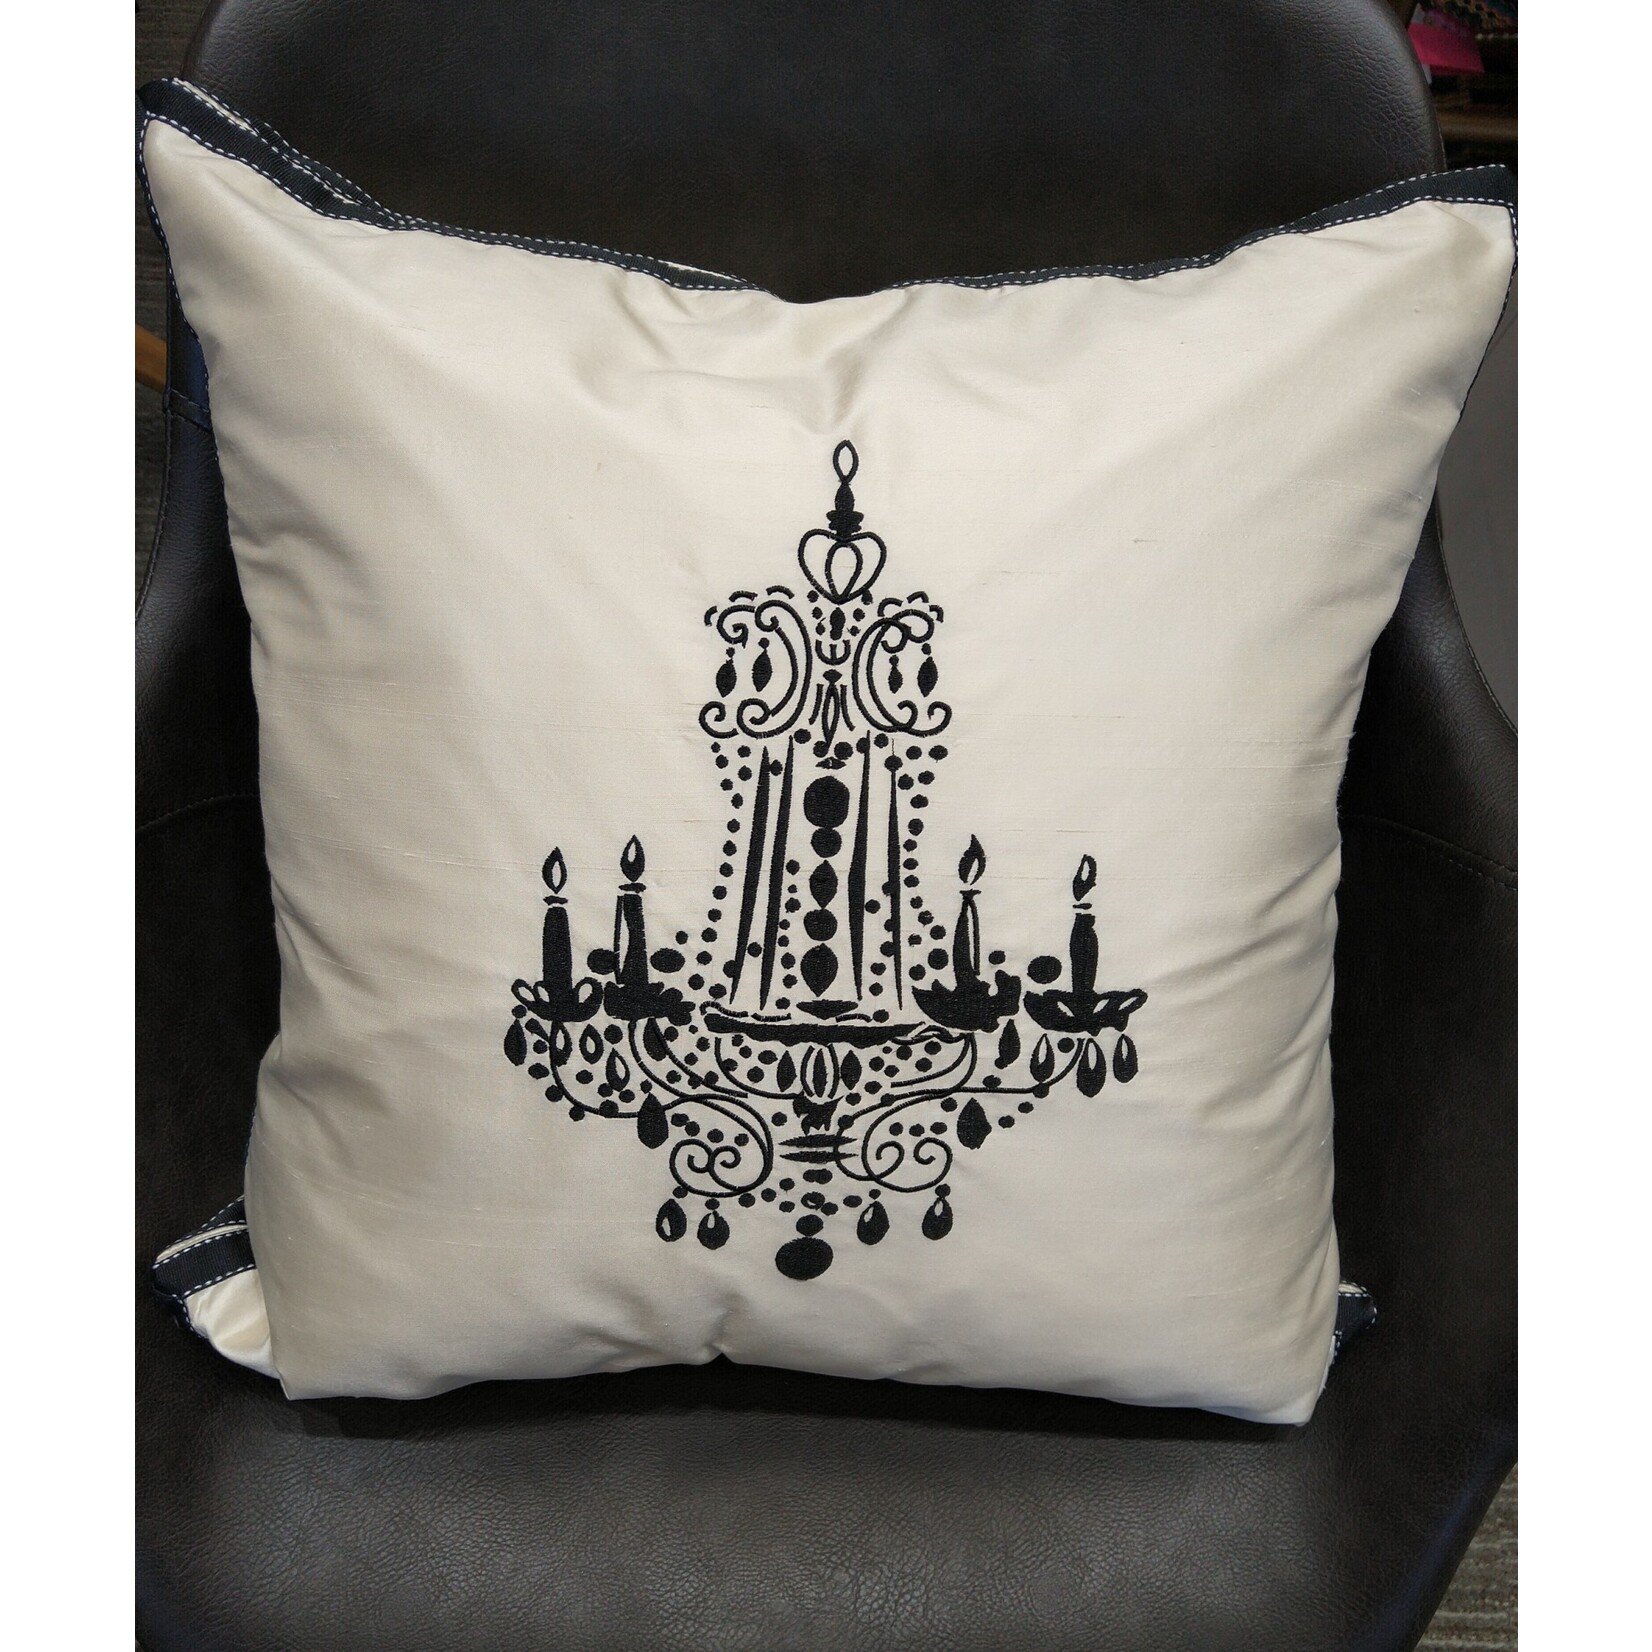 Eastern Accent Int Black Chandelier  Pillow 20x20